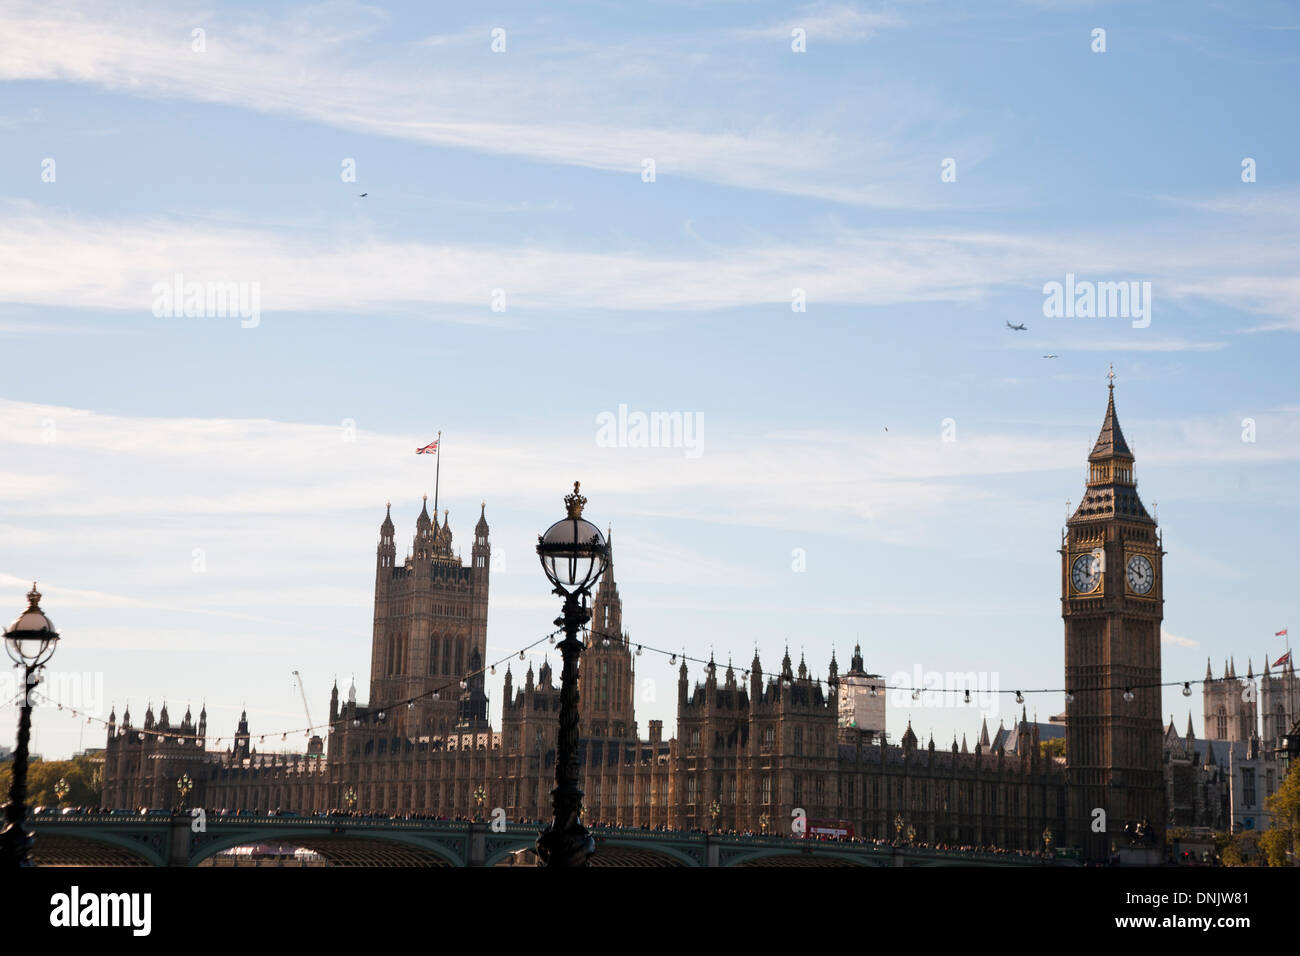 View of the Houses of Parliament showing Big Ben, London, England, United Kingdom Stock Photo